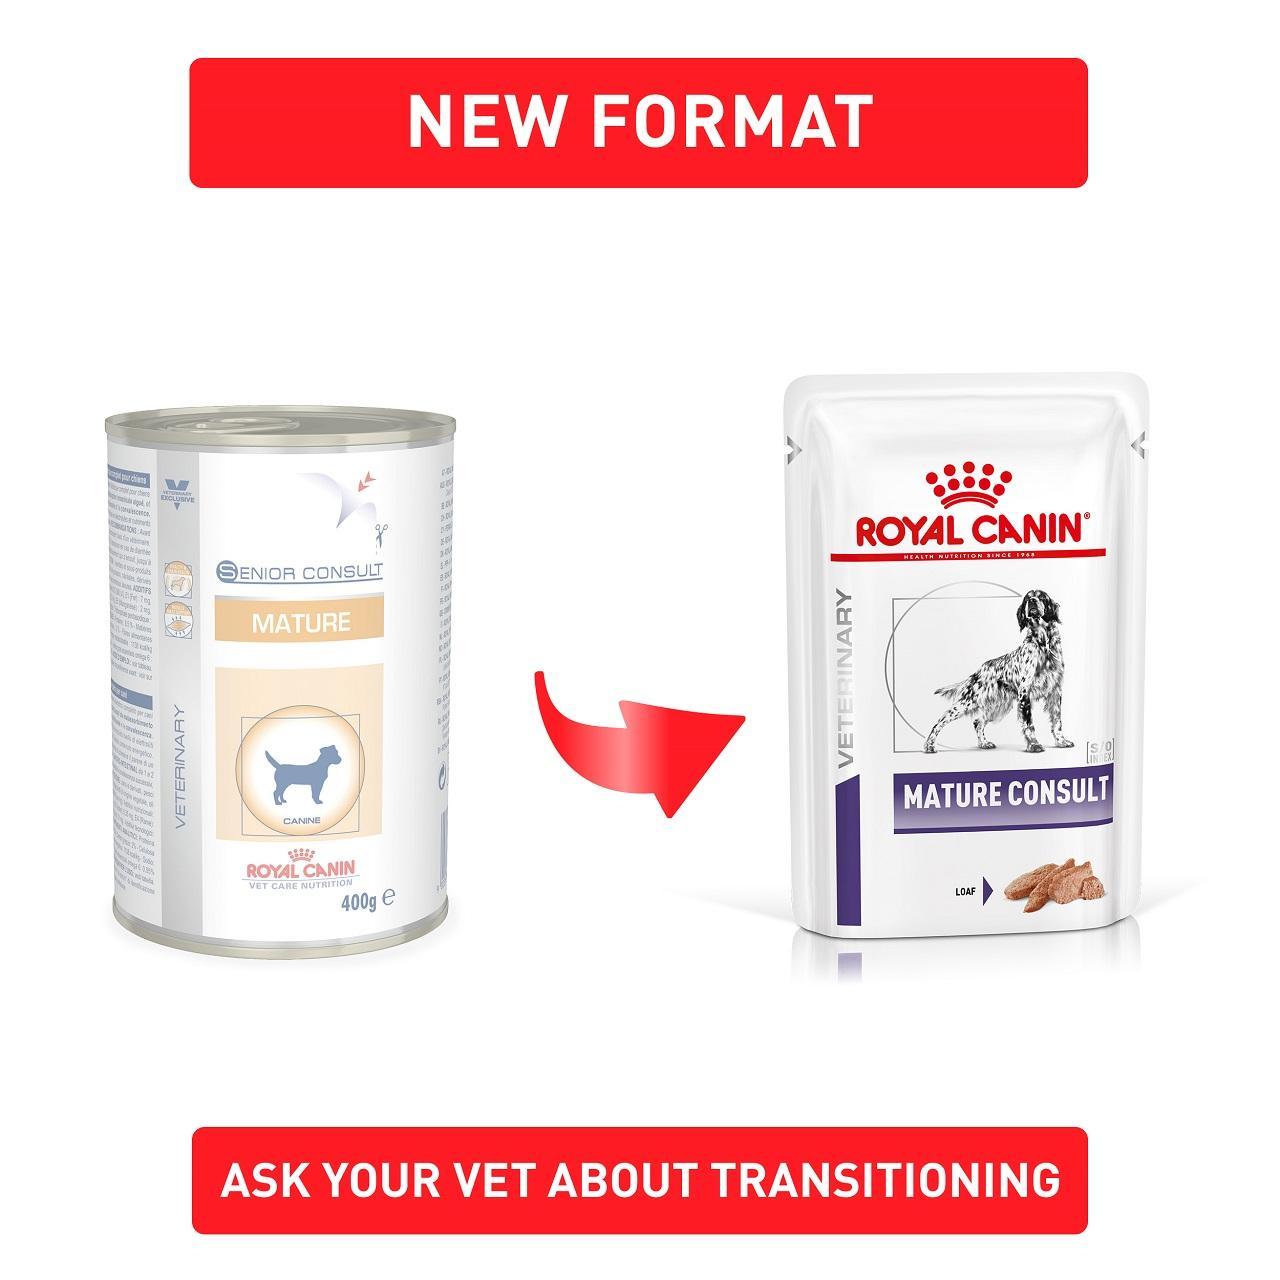 An image of Royal Canin Canine Senior Consult Mature